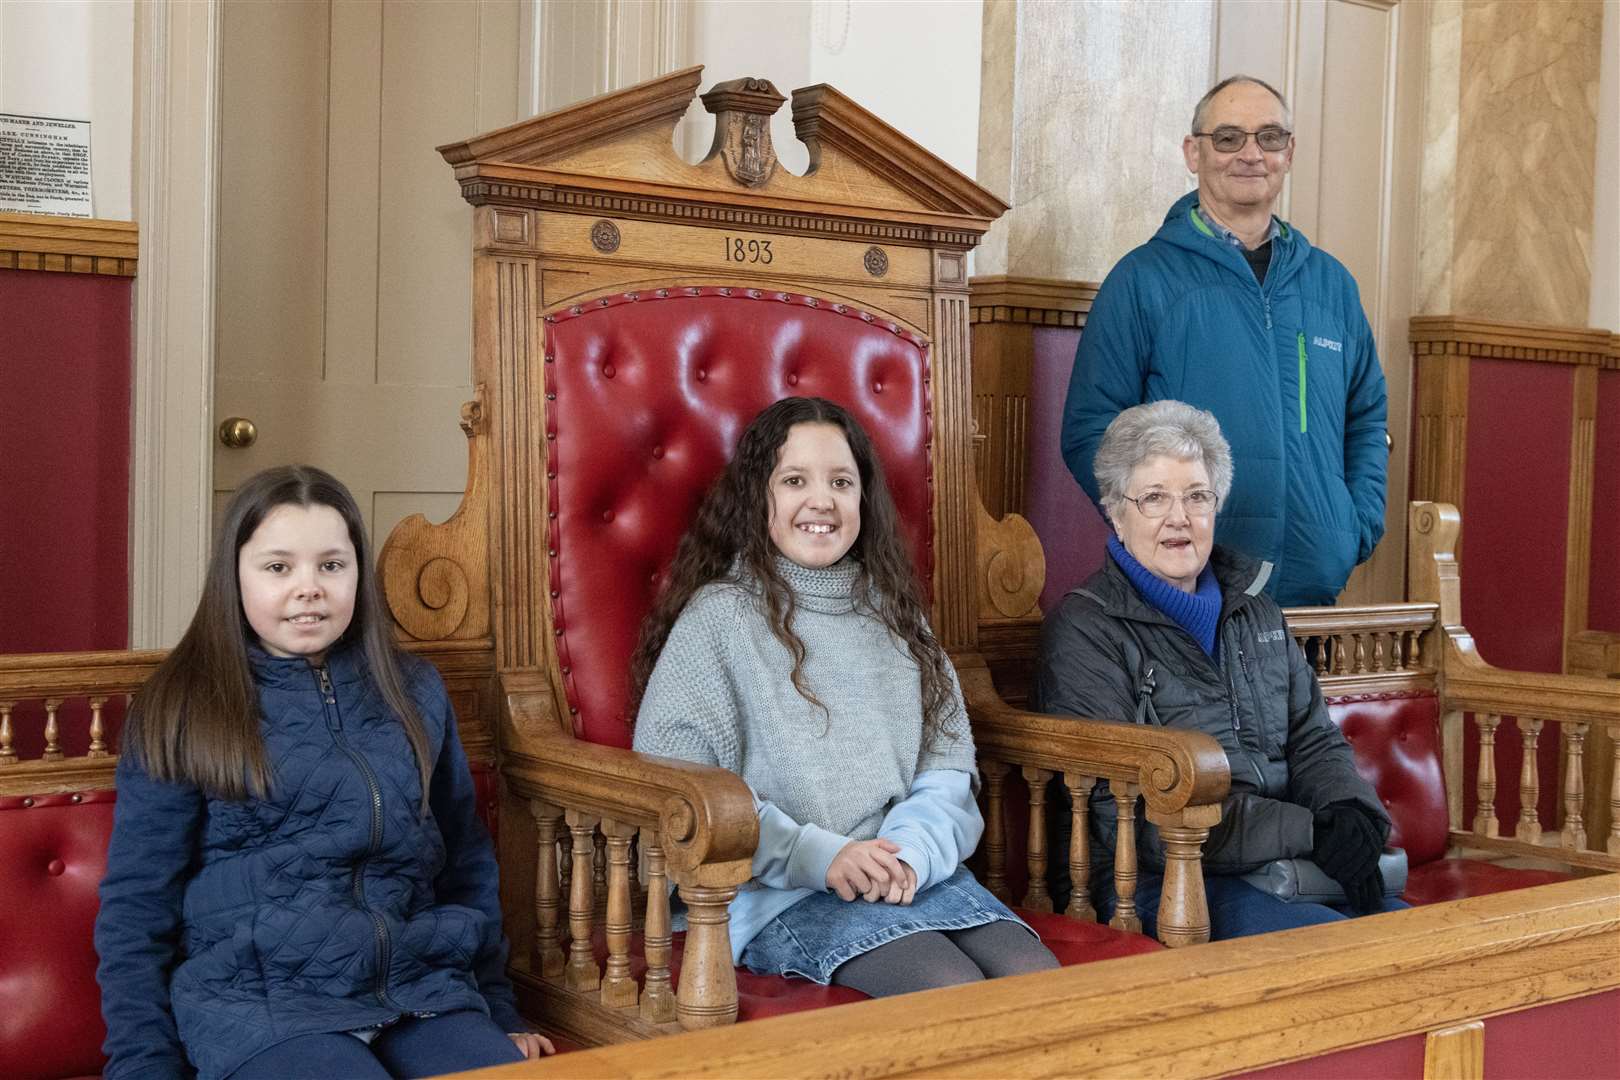 Laura and Lucy Hislop, and volunteers Susie Haworth and Peter Haworth in the Tolbooth courtroom.